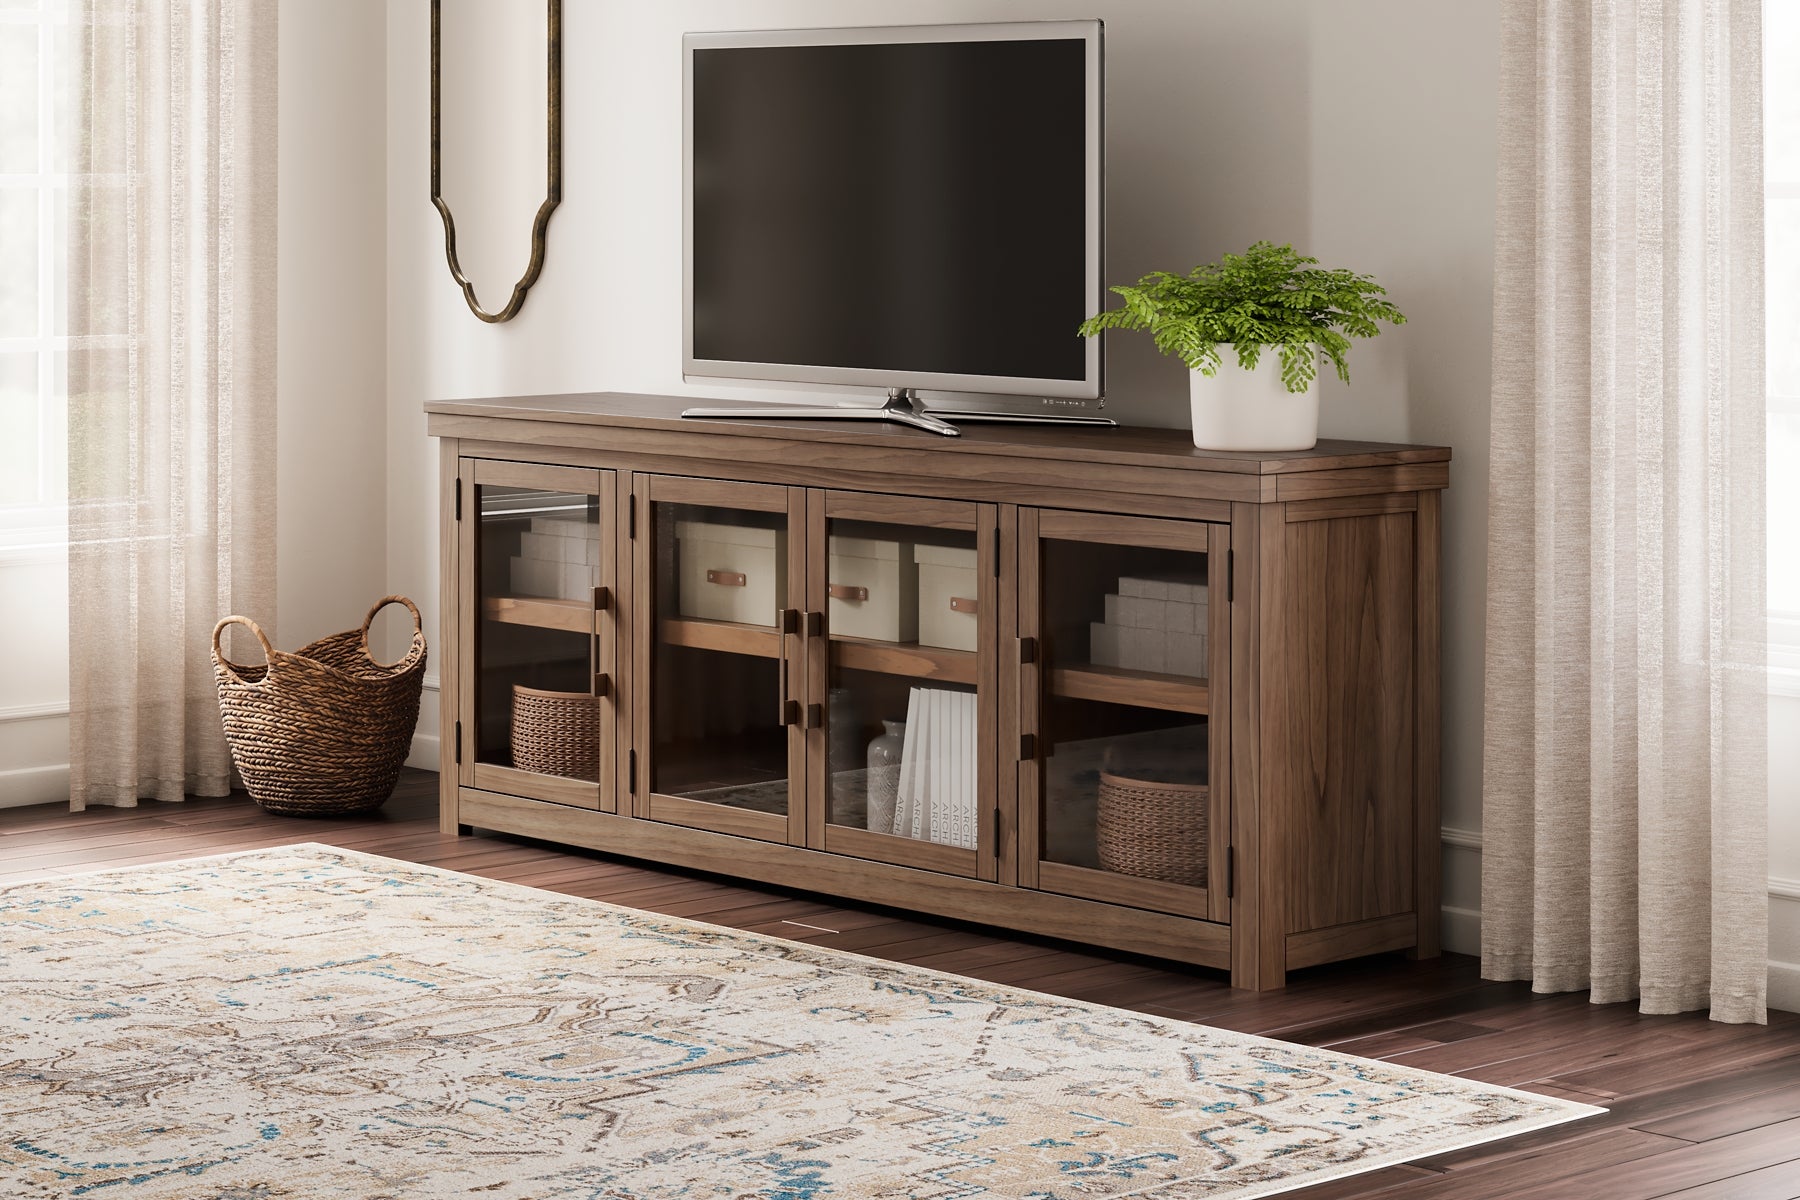 Boardernest Extra Large TV Stand JB's Furniture  Home Furniture, Home Decor, Furniture Store